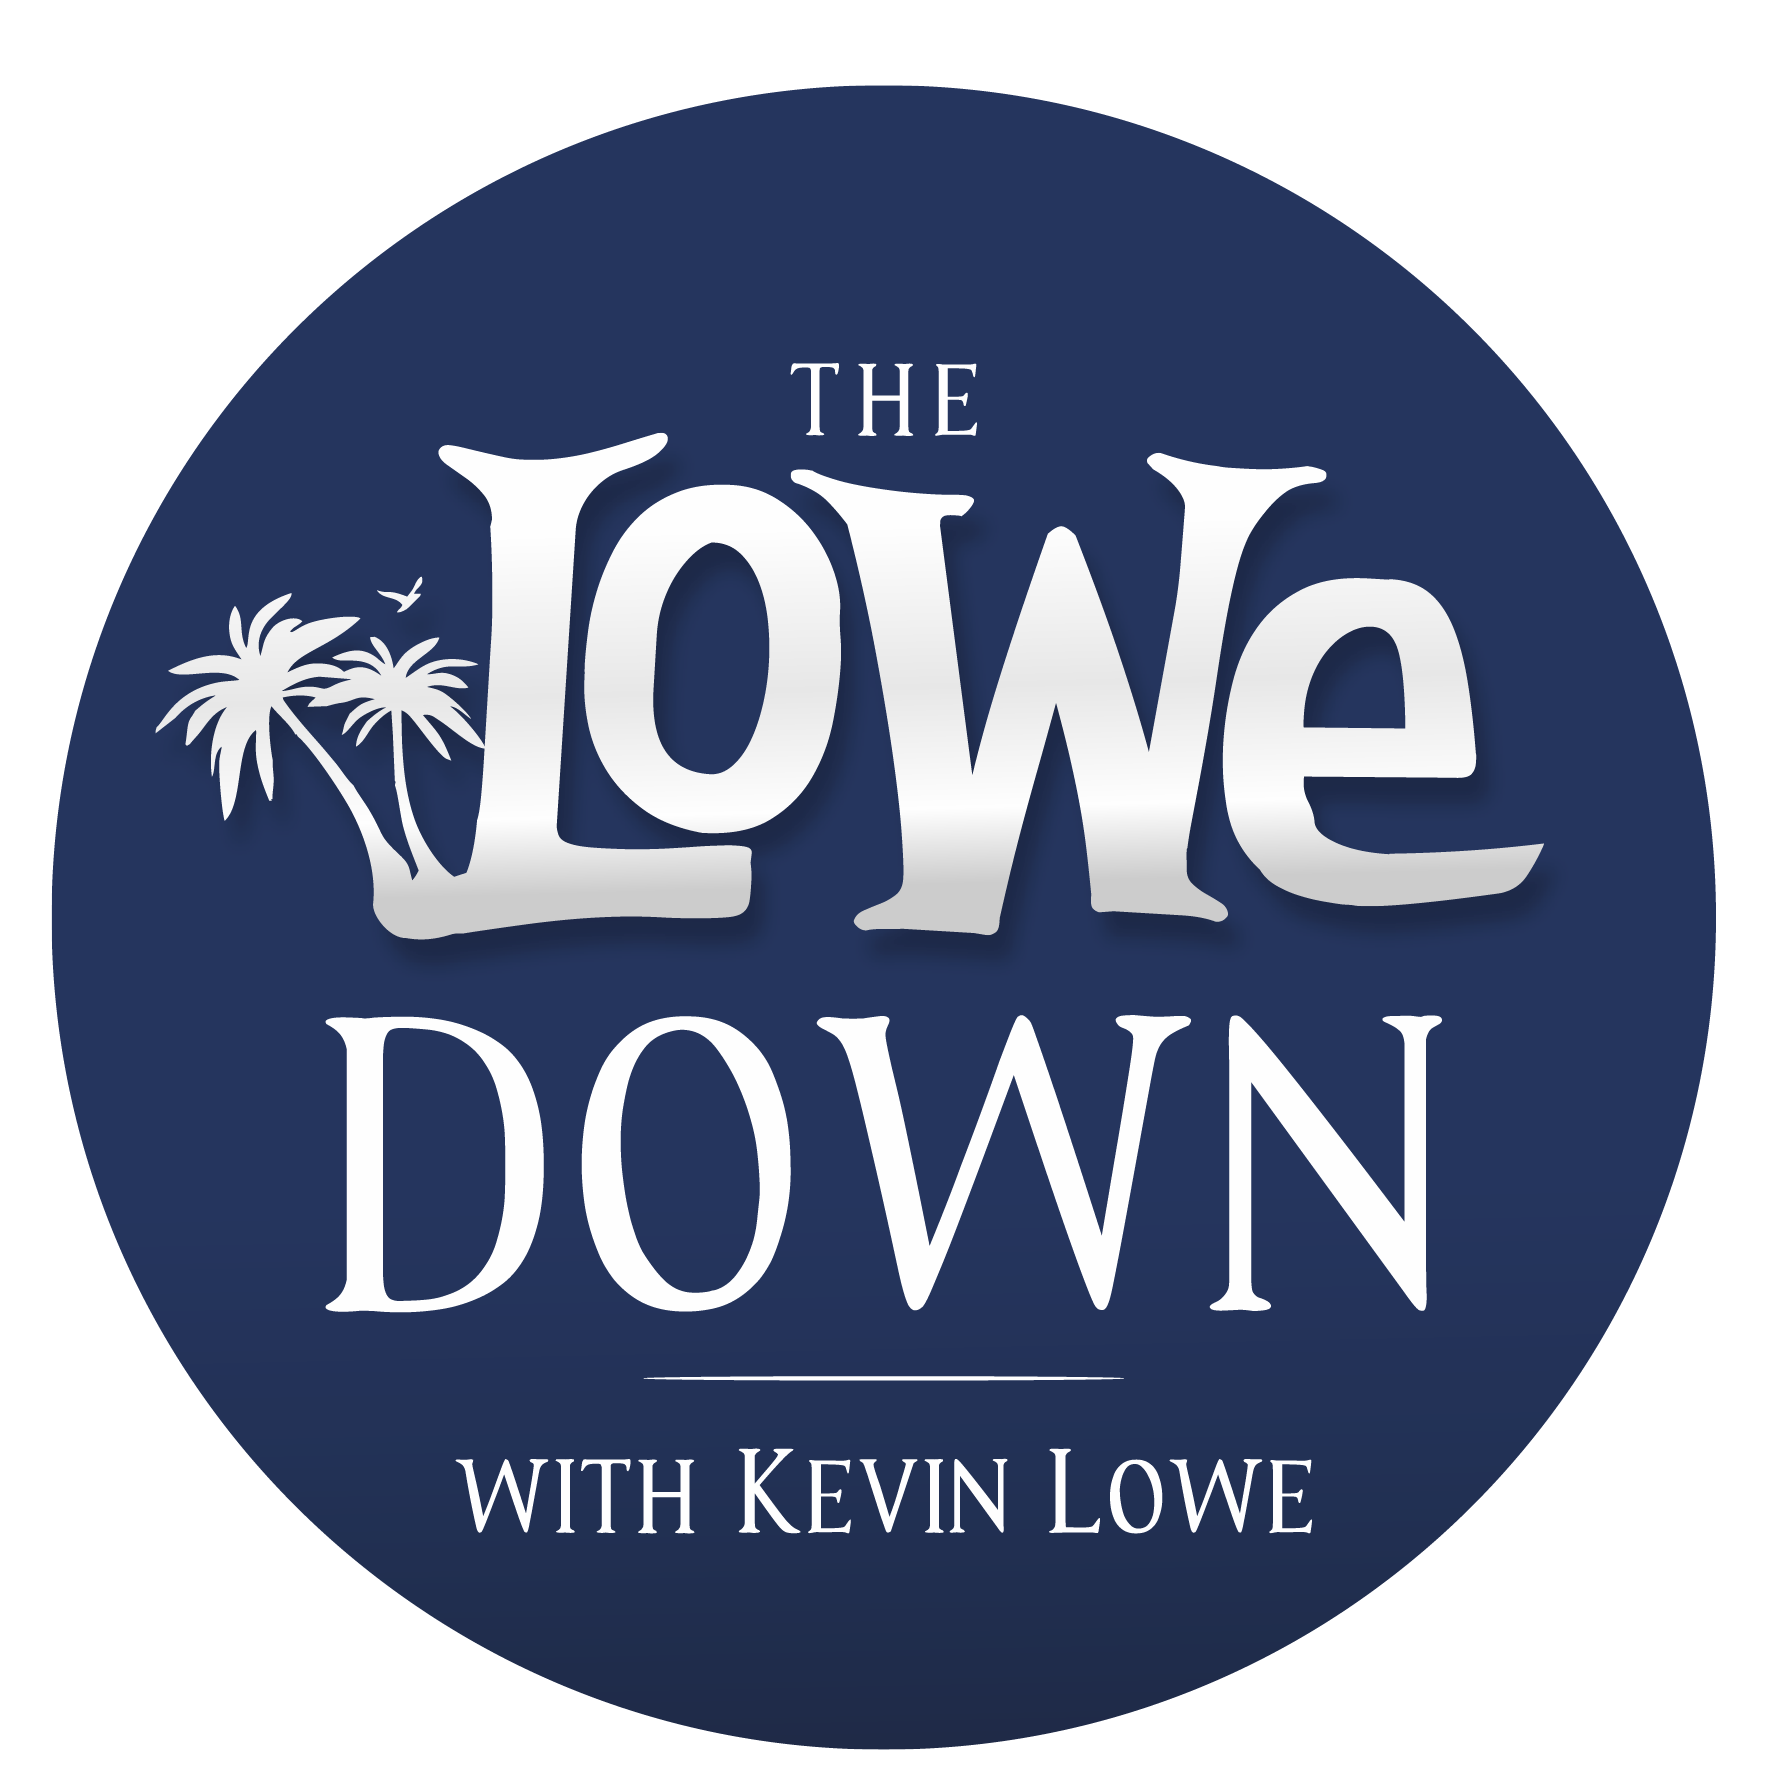 The Lowe Down with Kevin Lowe